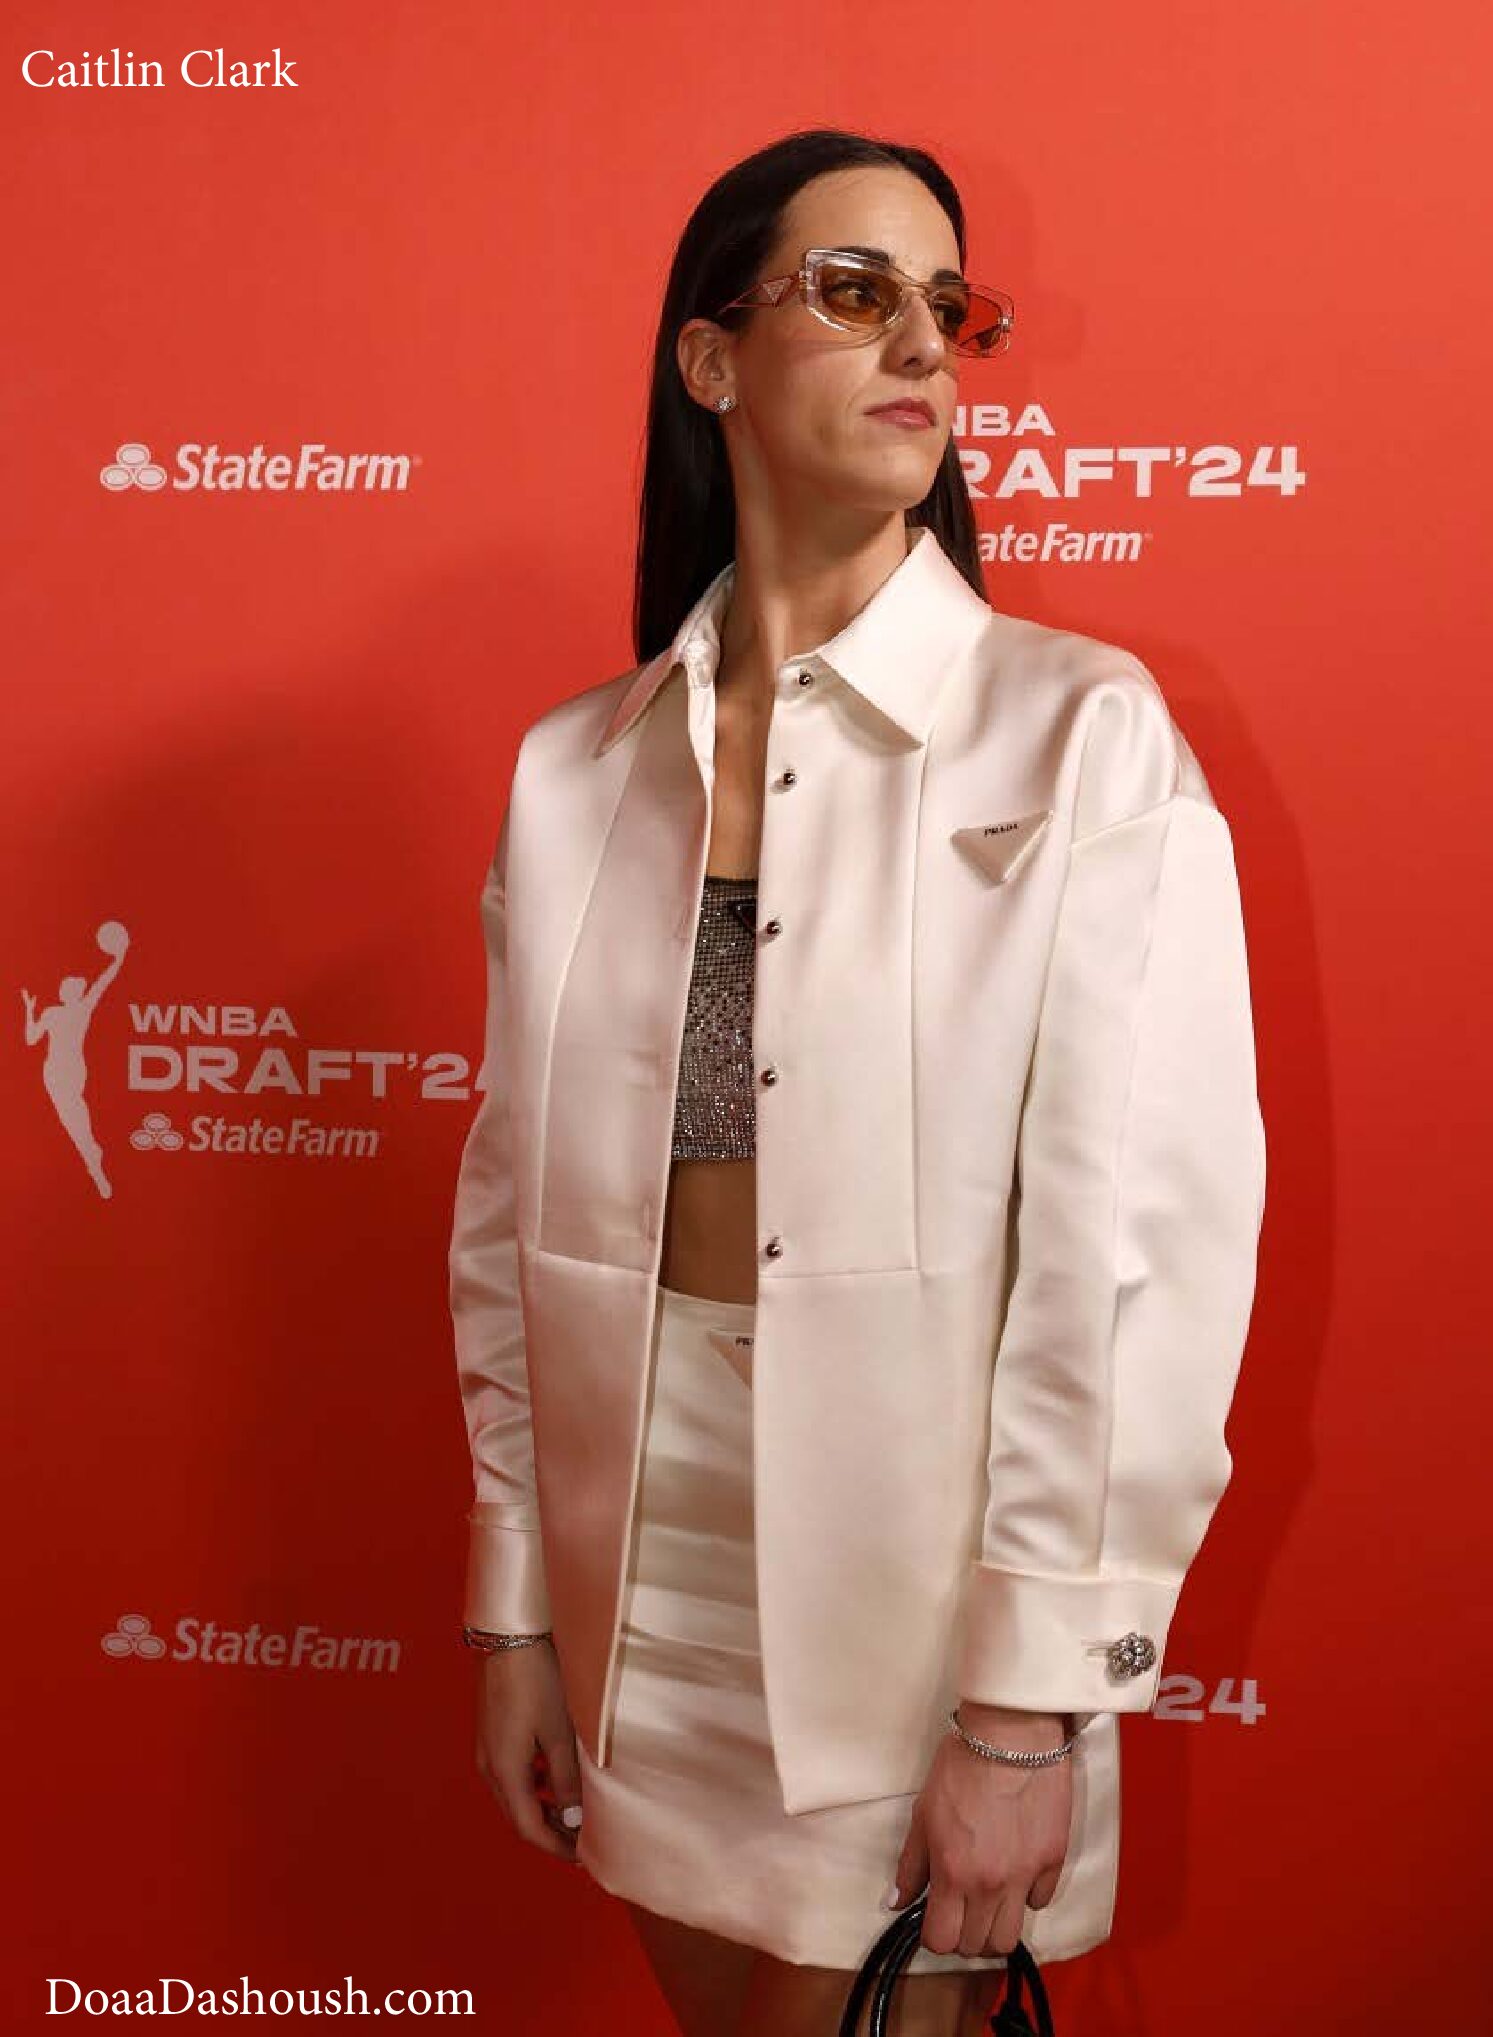 First Pick, First in Fashion: Caitlin Clark Makes History in Prada at the WNBA Draft